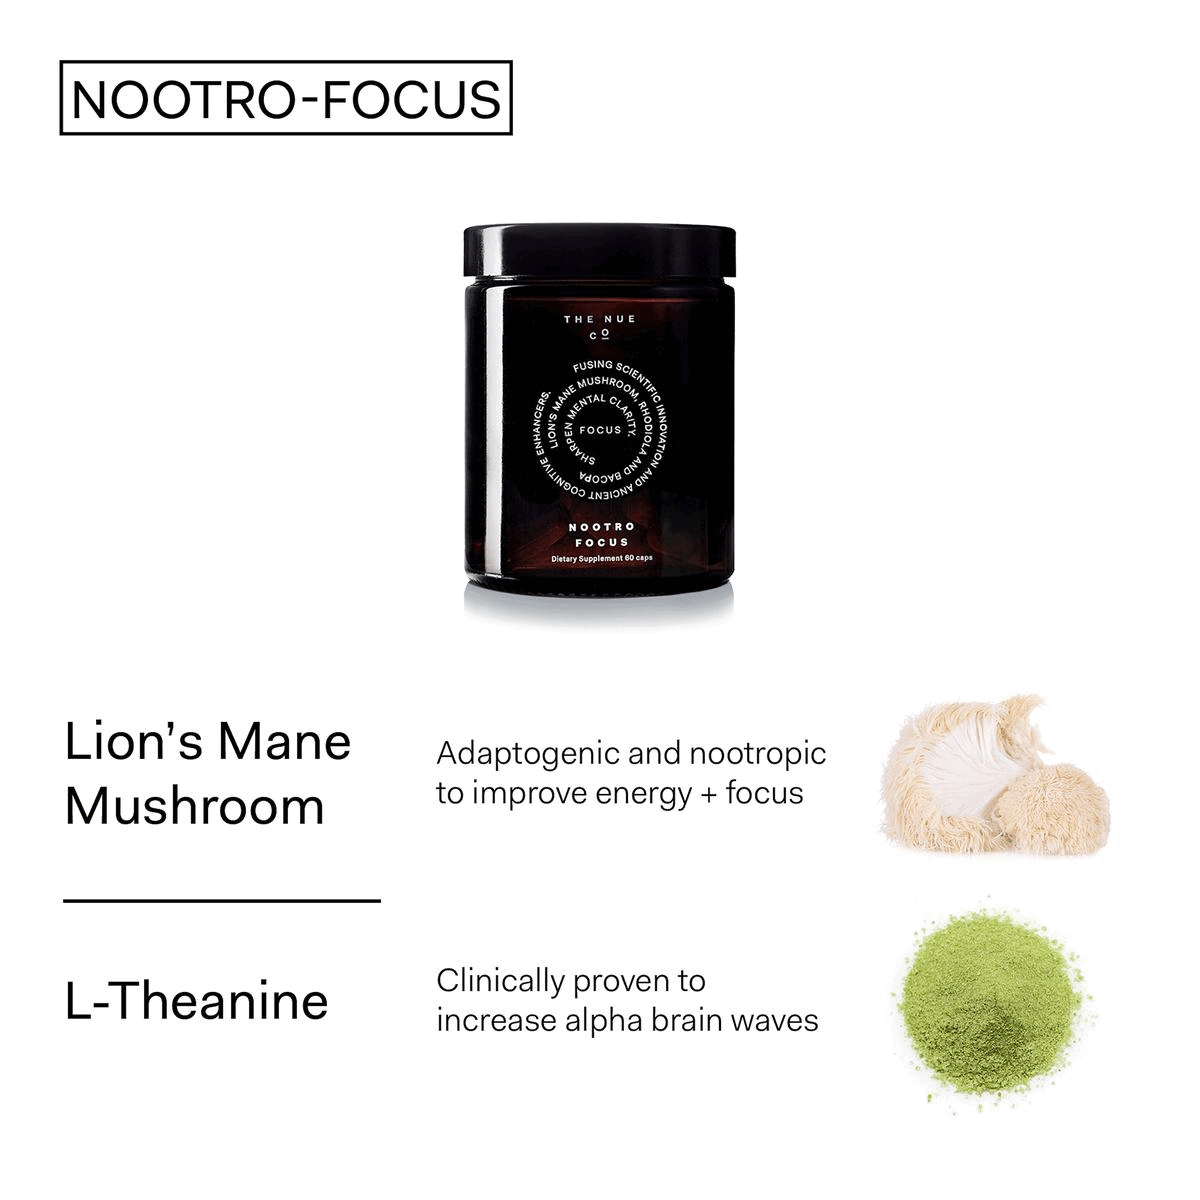 Image 1, ingredients and their benefits. Image 2, difference between nootro-focus vs mind energy